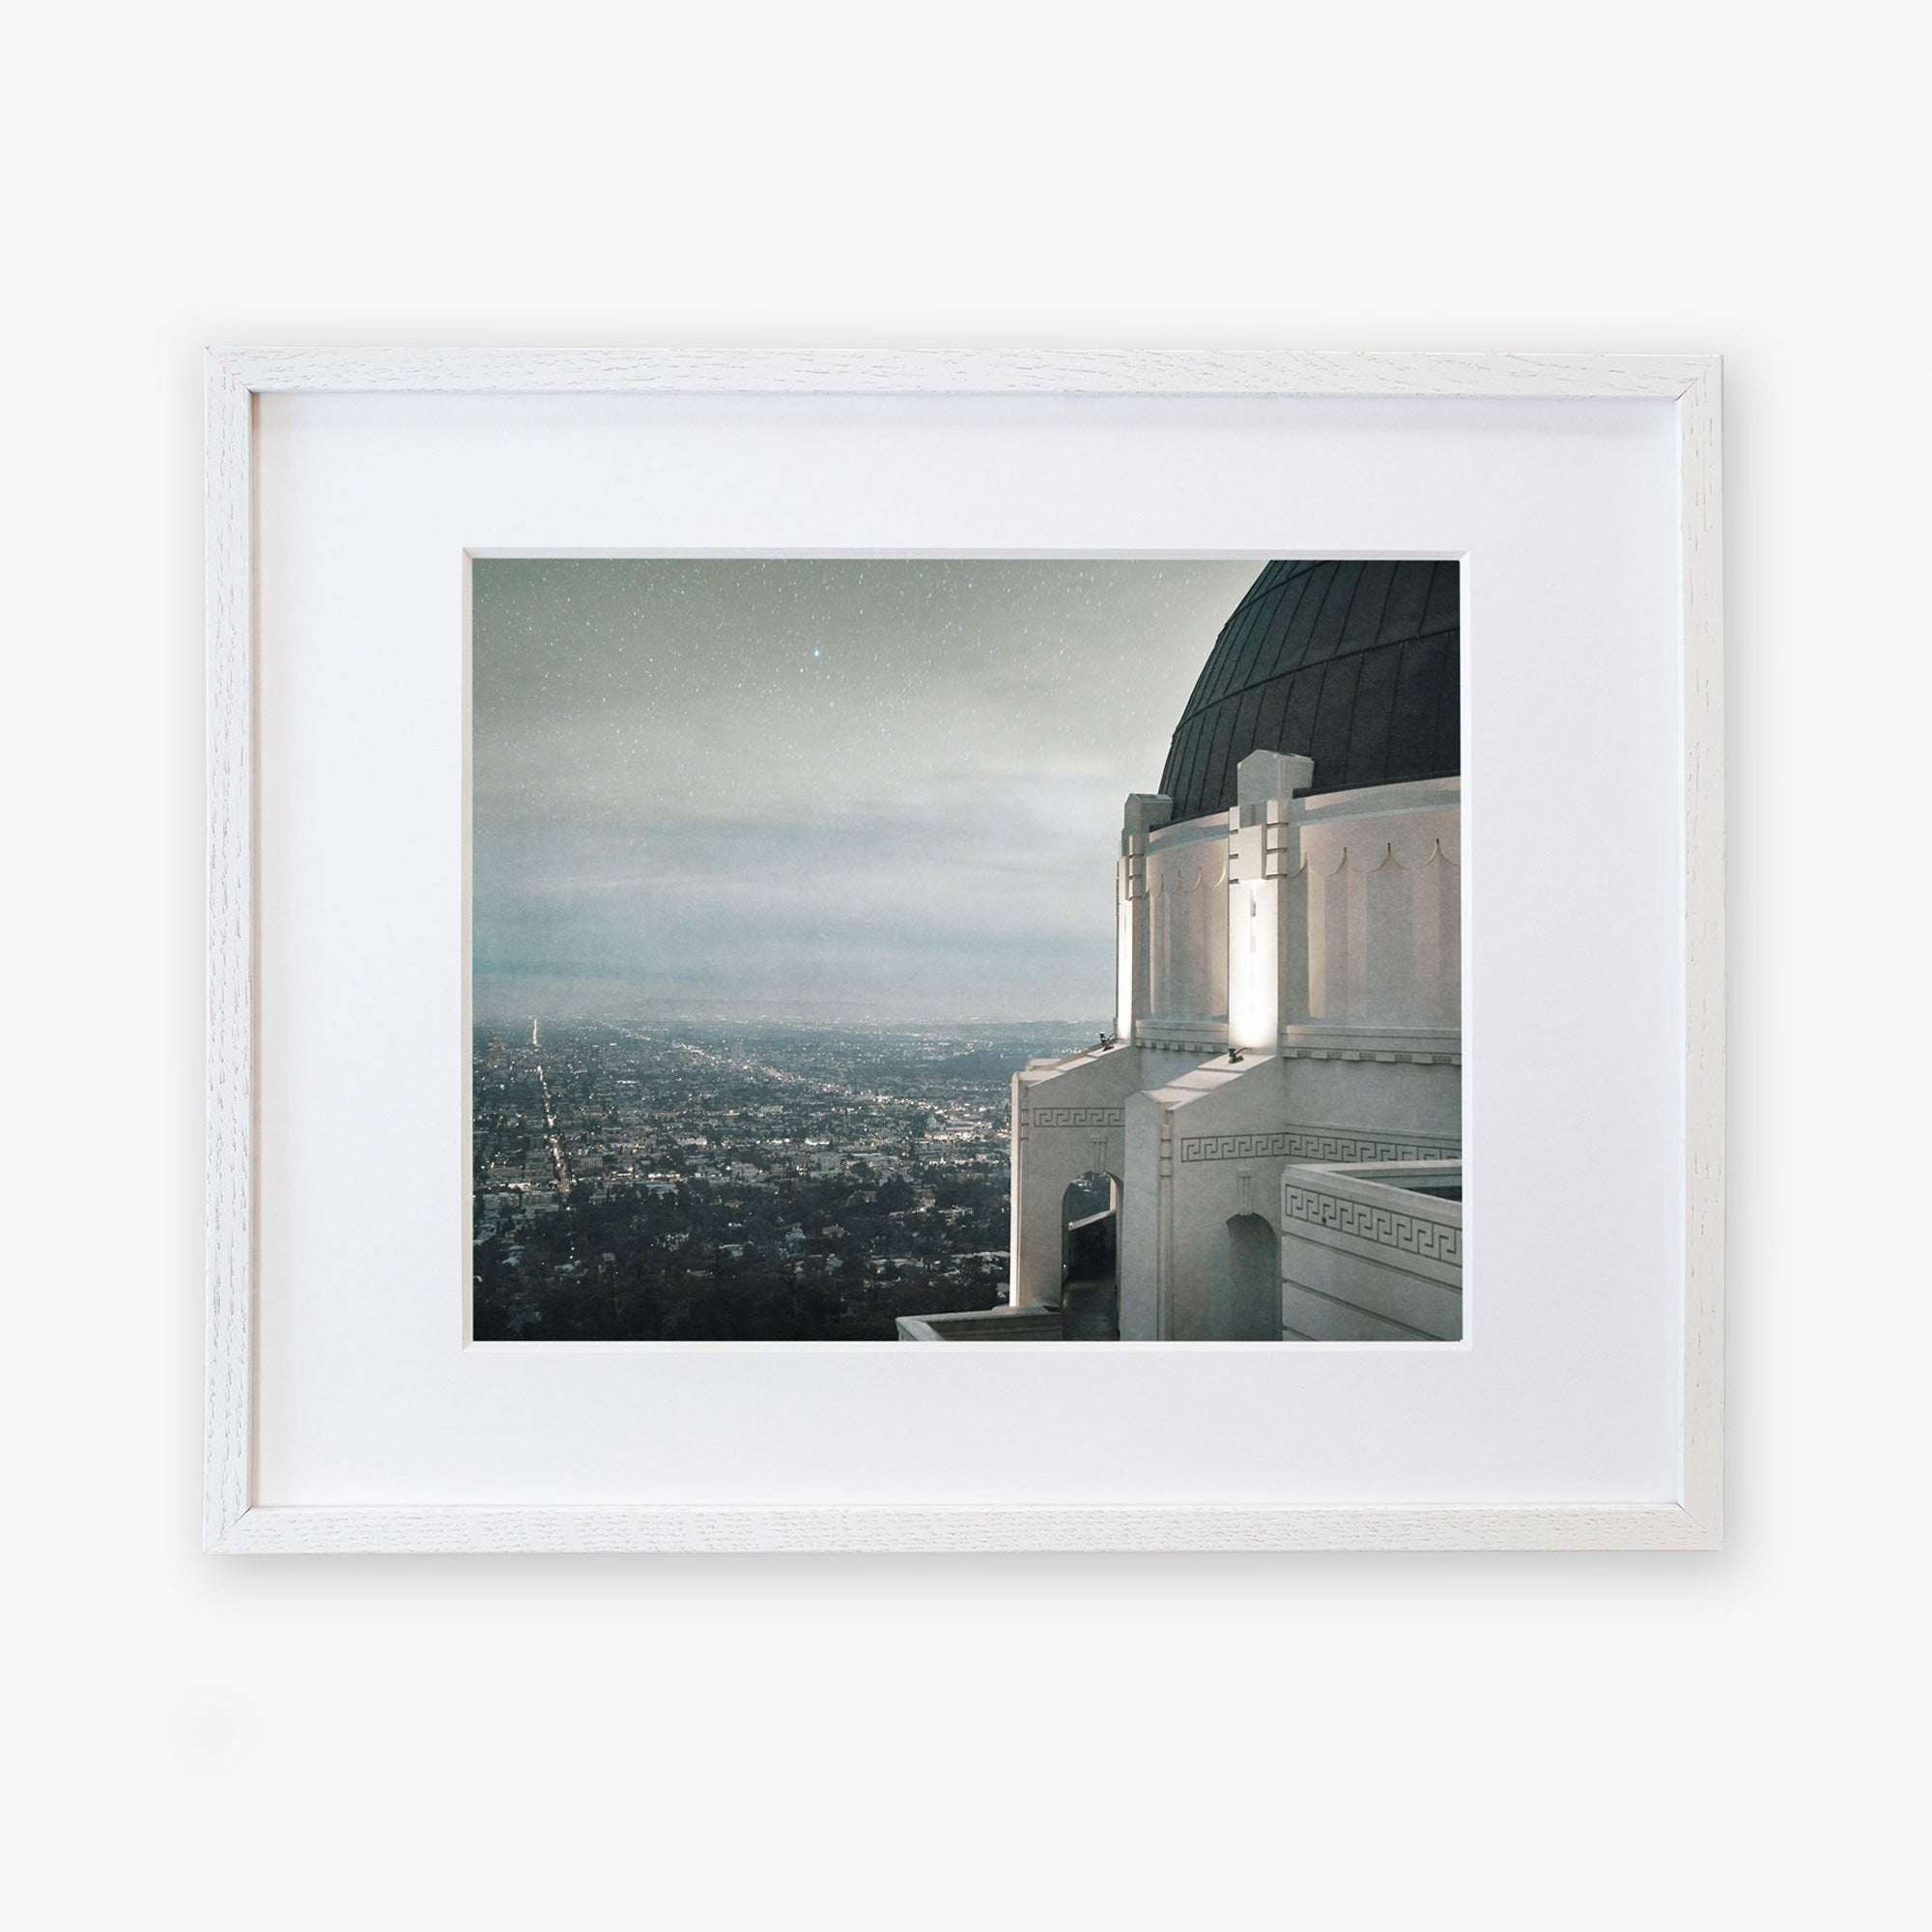 A framed archival photographic Griffith Observatory Print, &#39;The Sky At Night&#39; of a cityscape viewed from a high vantage point at dusk, featuring the prominent Griffith Observatory with a rounded dome in the foreground against a star-speckled sky by Offley Green.